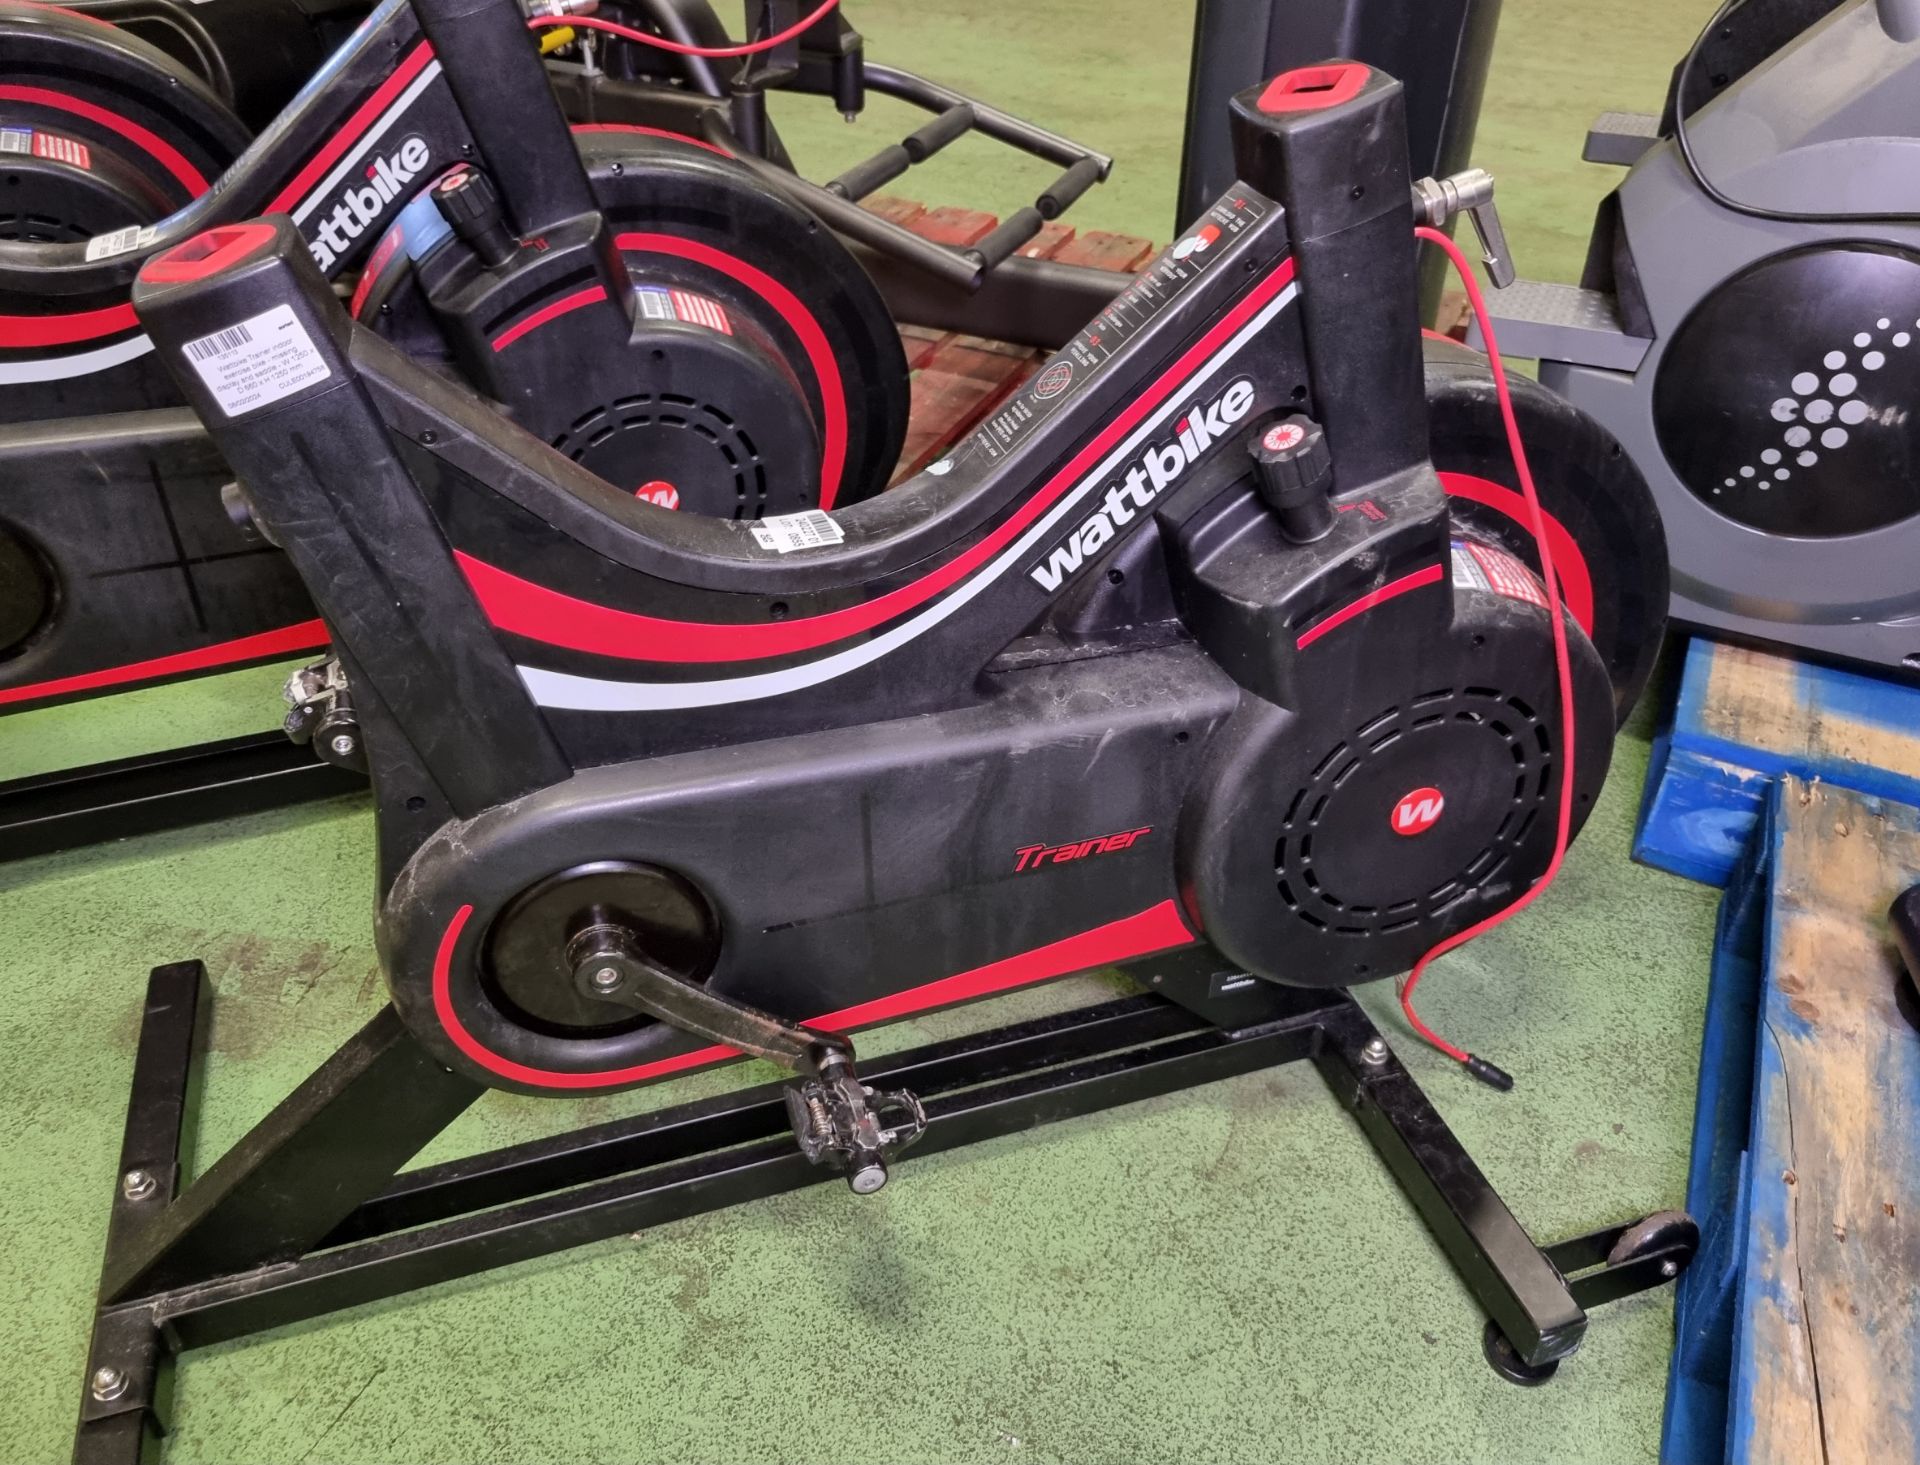 Wattbike Trainer indoor exercise bike - BODY ONLY - missing handle bars, display and saddle - Image 3 of 5